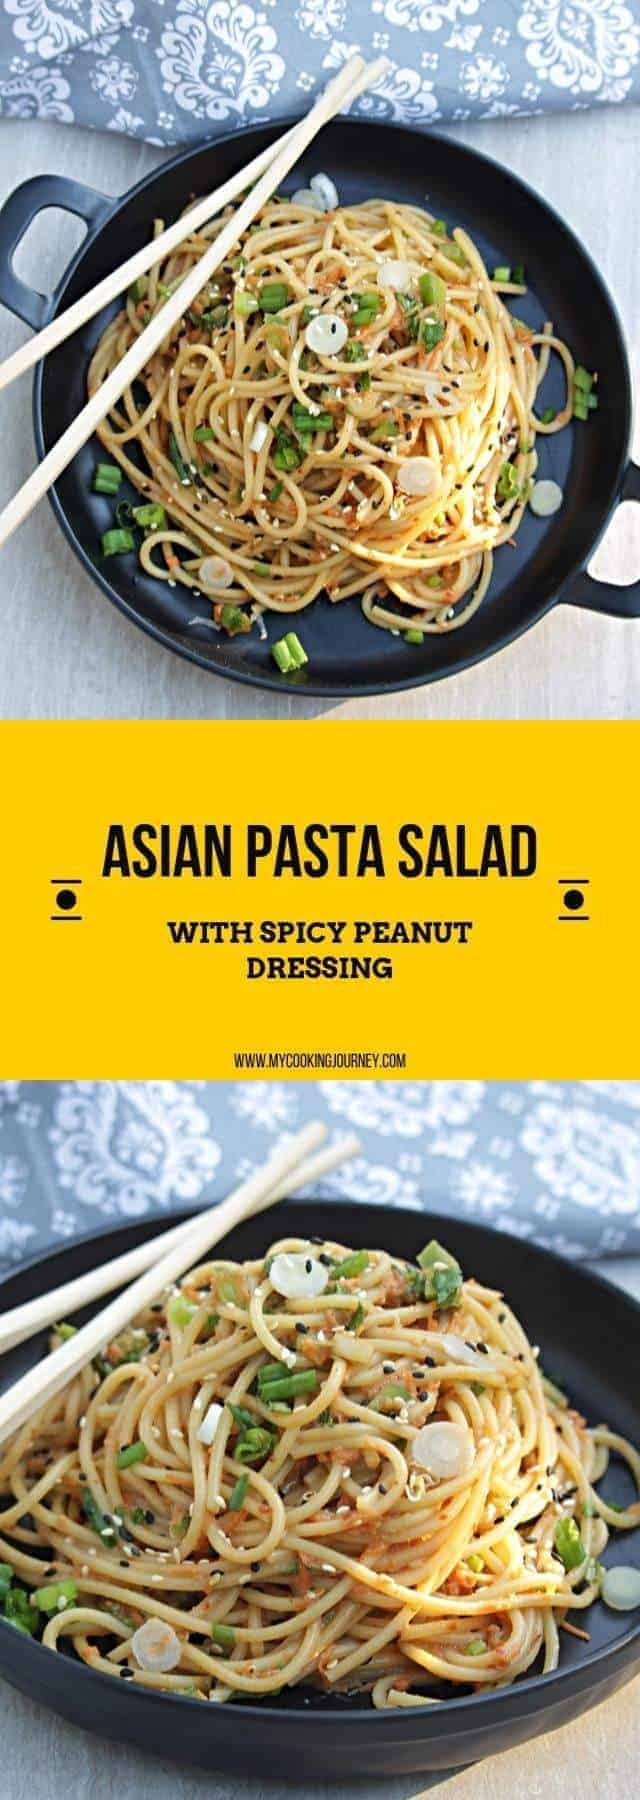 Asian Pasta Salad With Peanut Dressing - My Cooking Journey